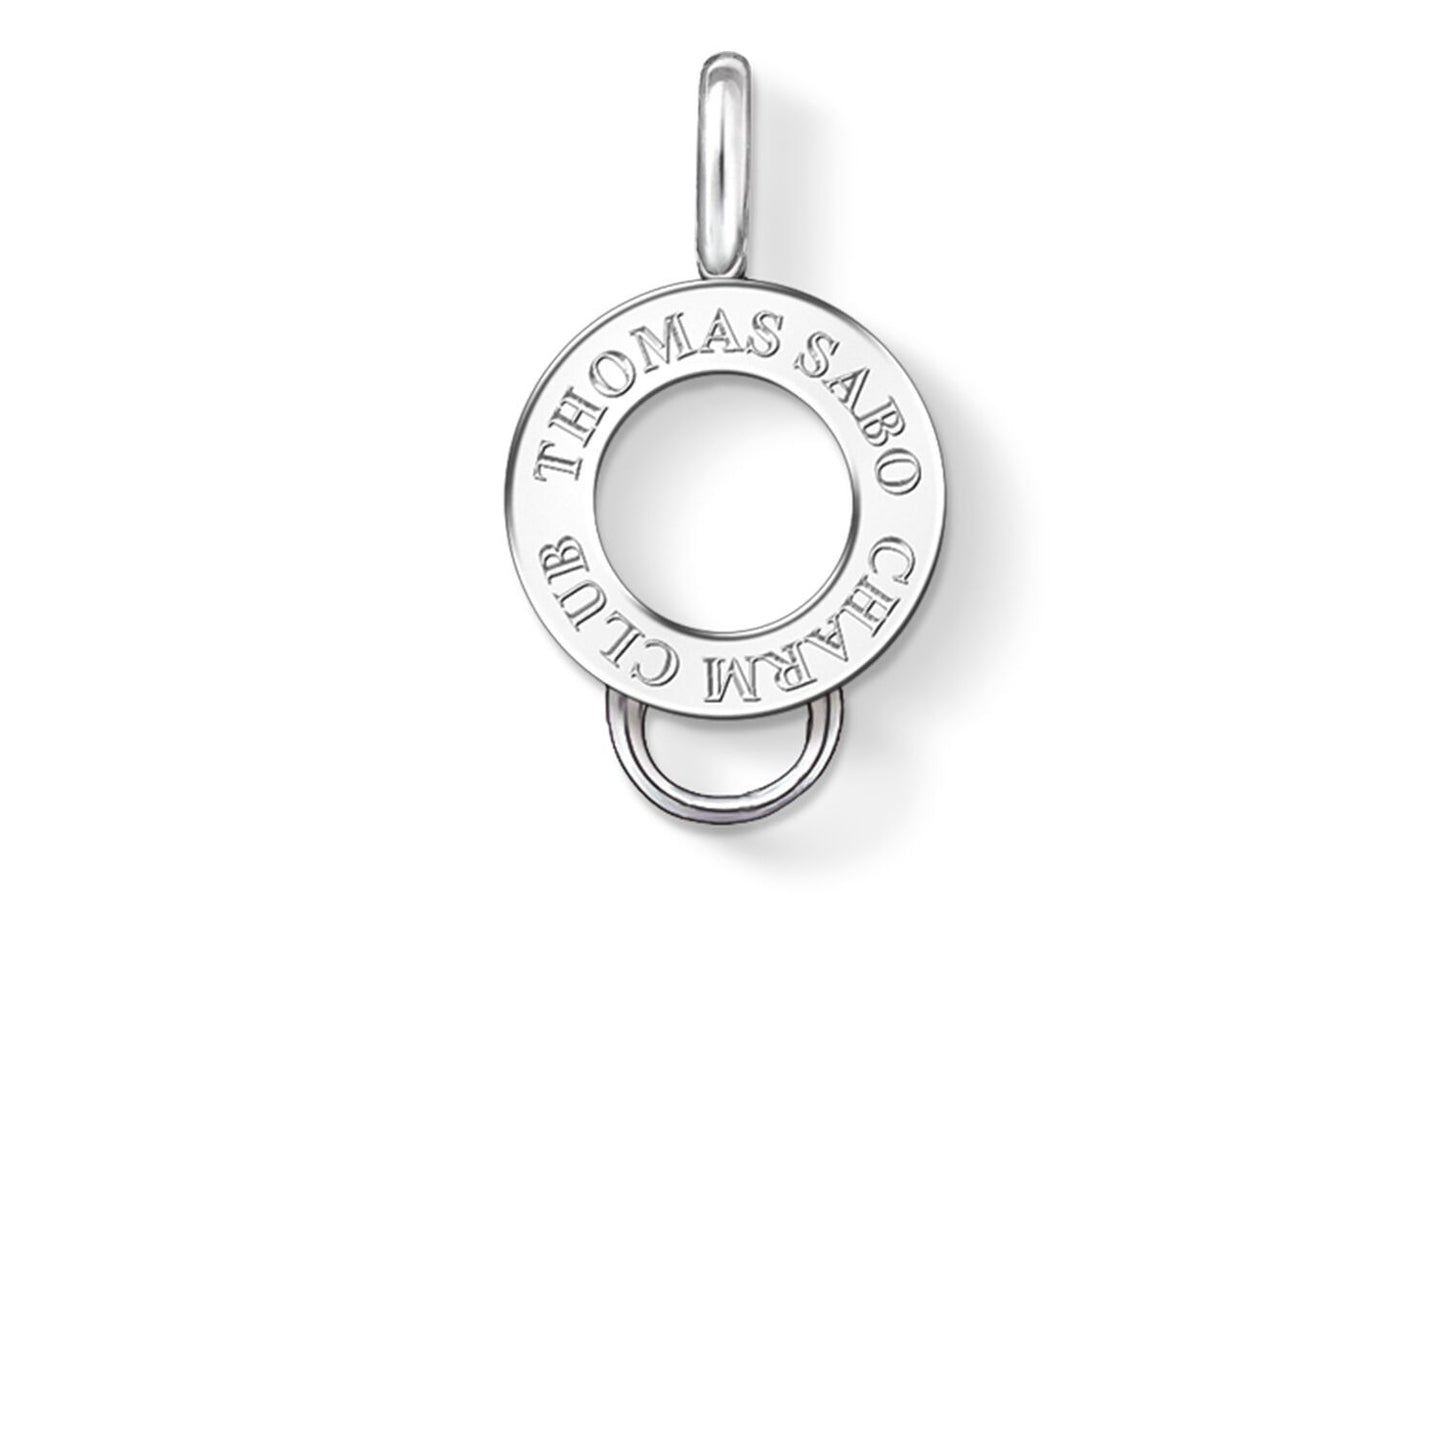 CHARM CLUB STERLING SILVER CHARM CARRIER